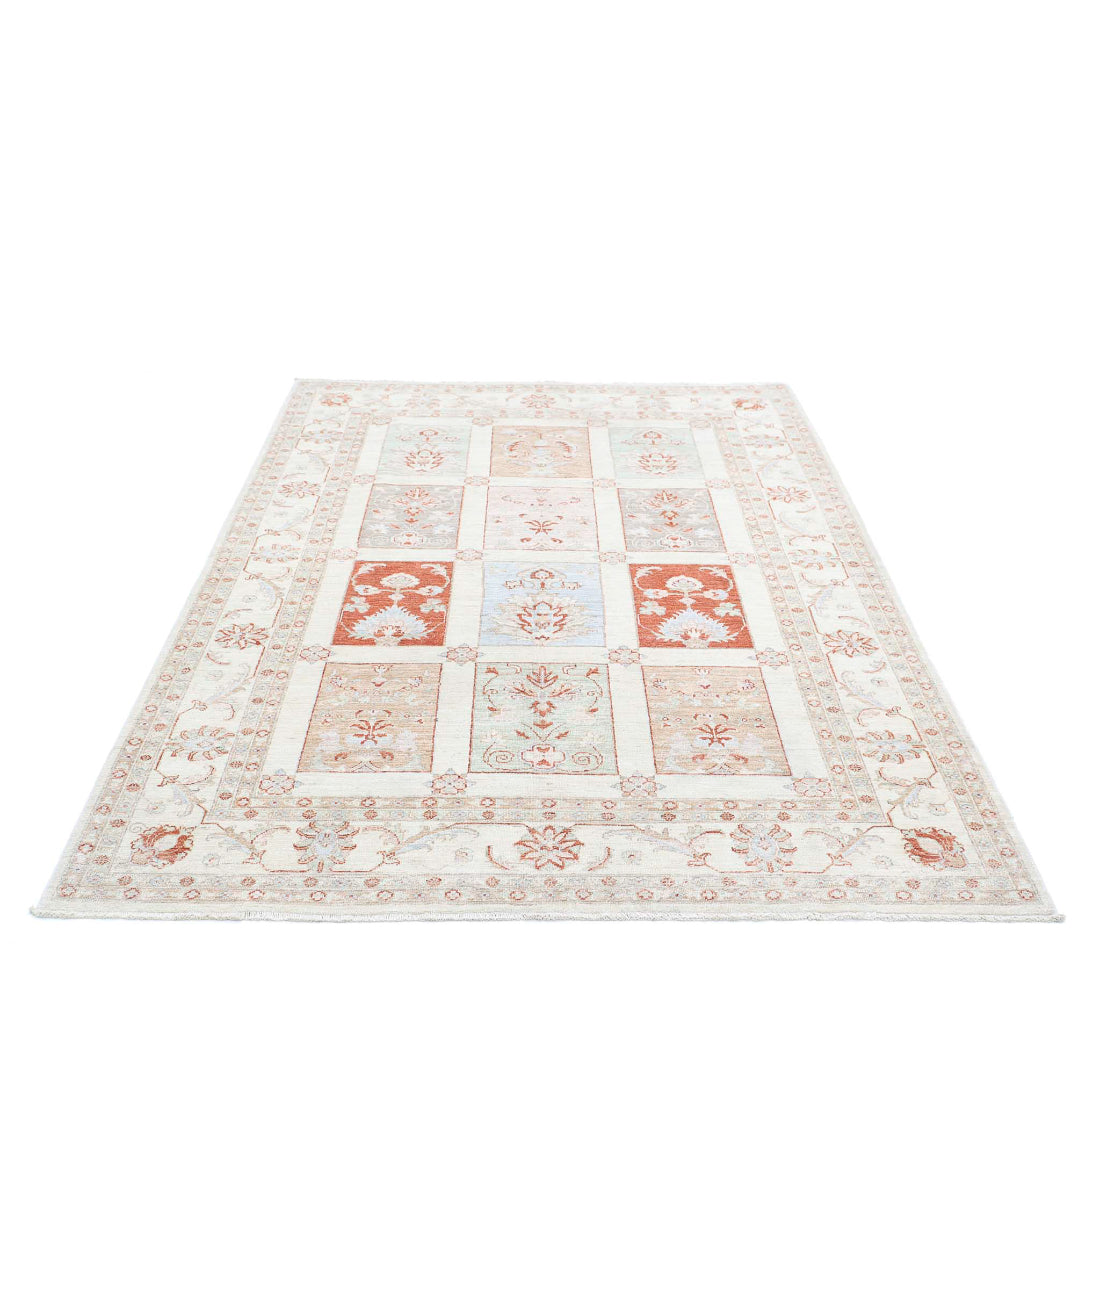 Hand Knotted Serenity Wool Rug - 5'6'' x 7'7'' 5'6'' x 7'7'' (165 X 228) / Ivory / Red